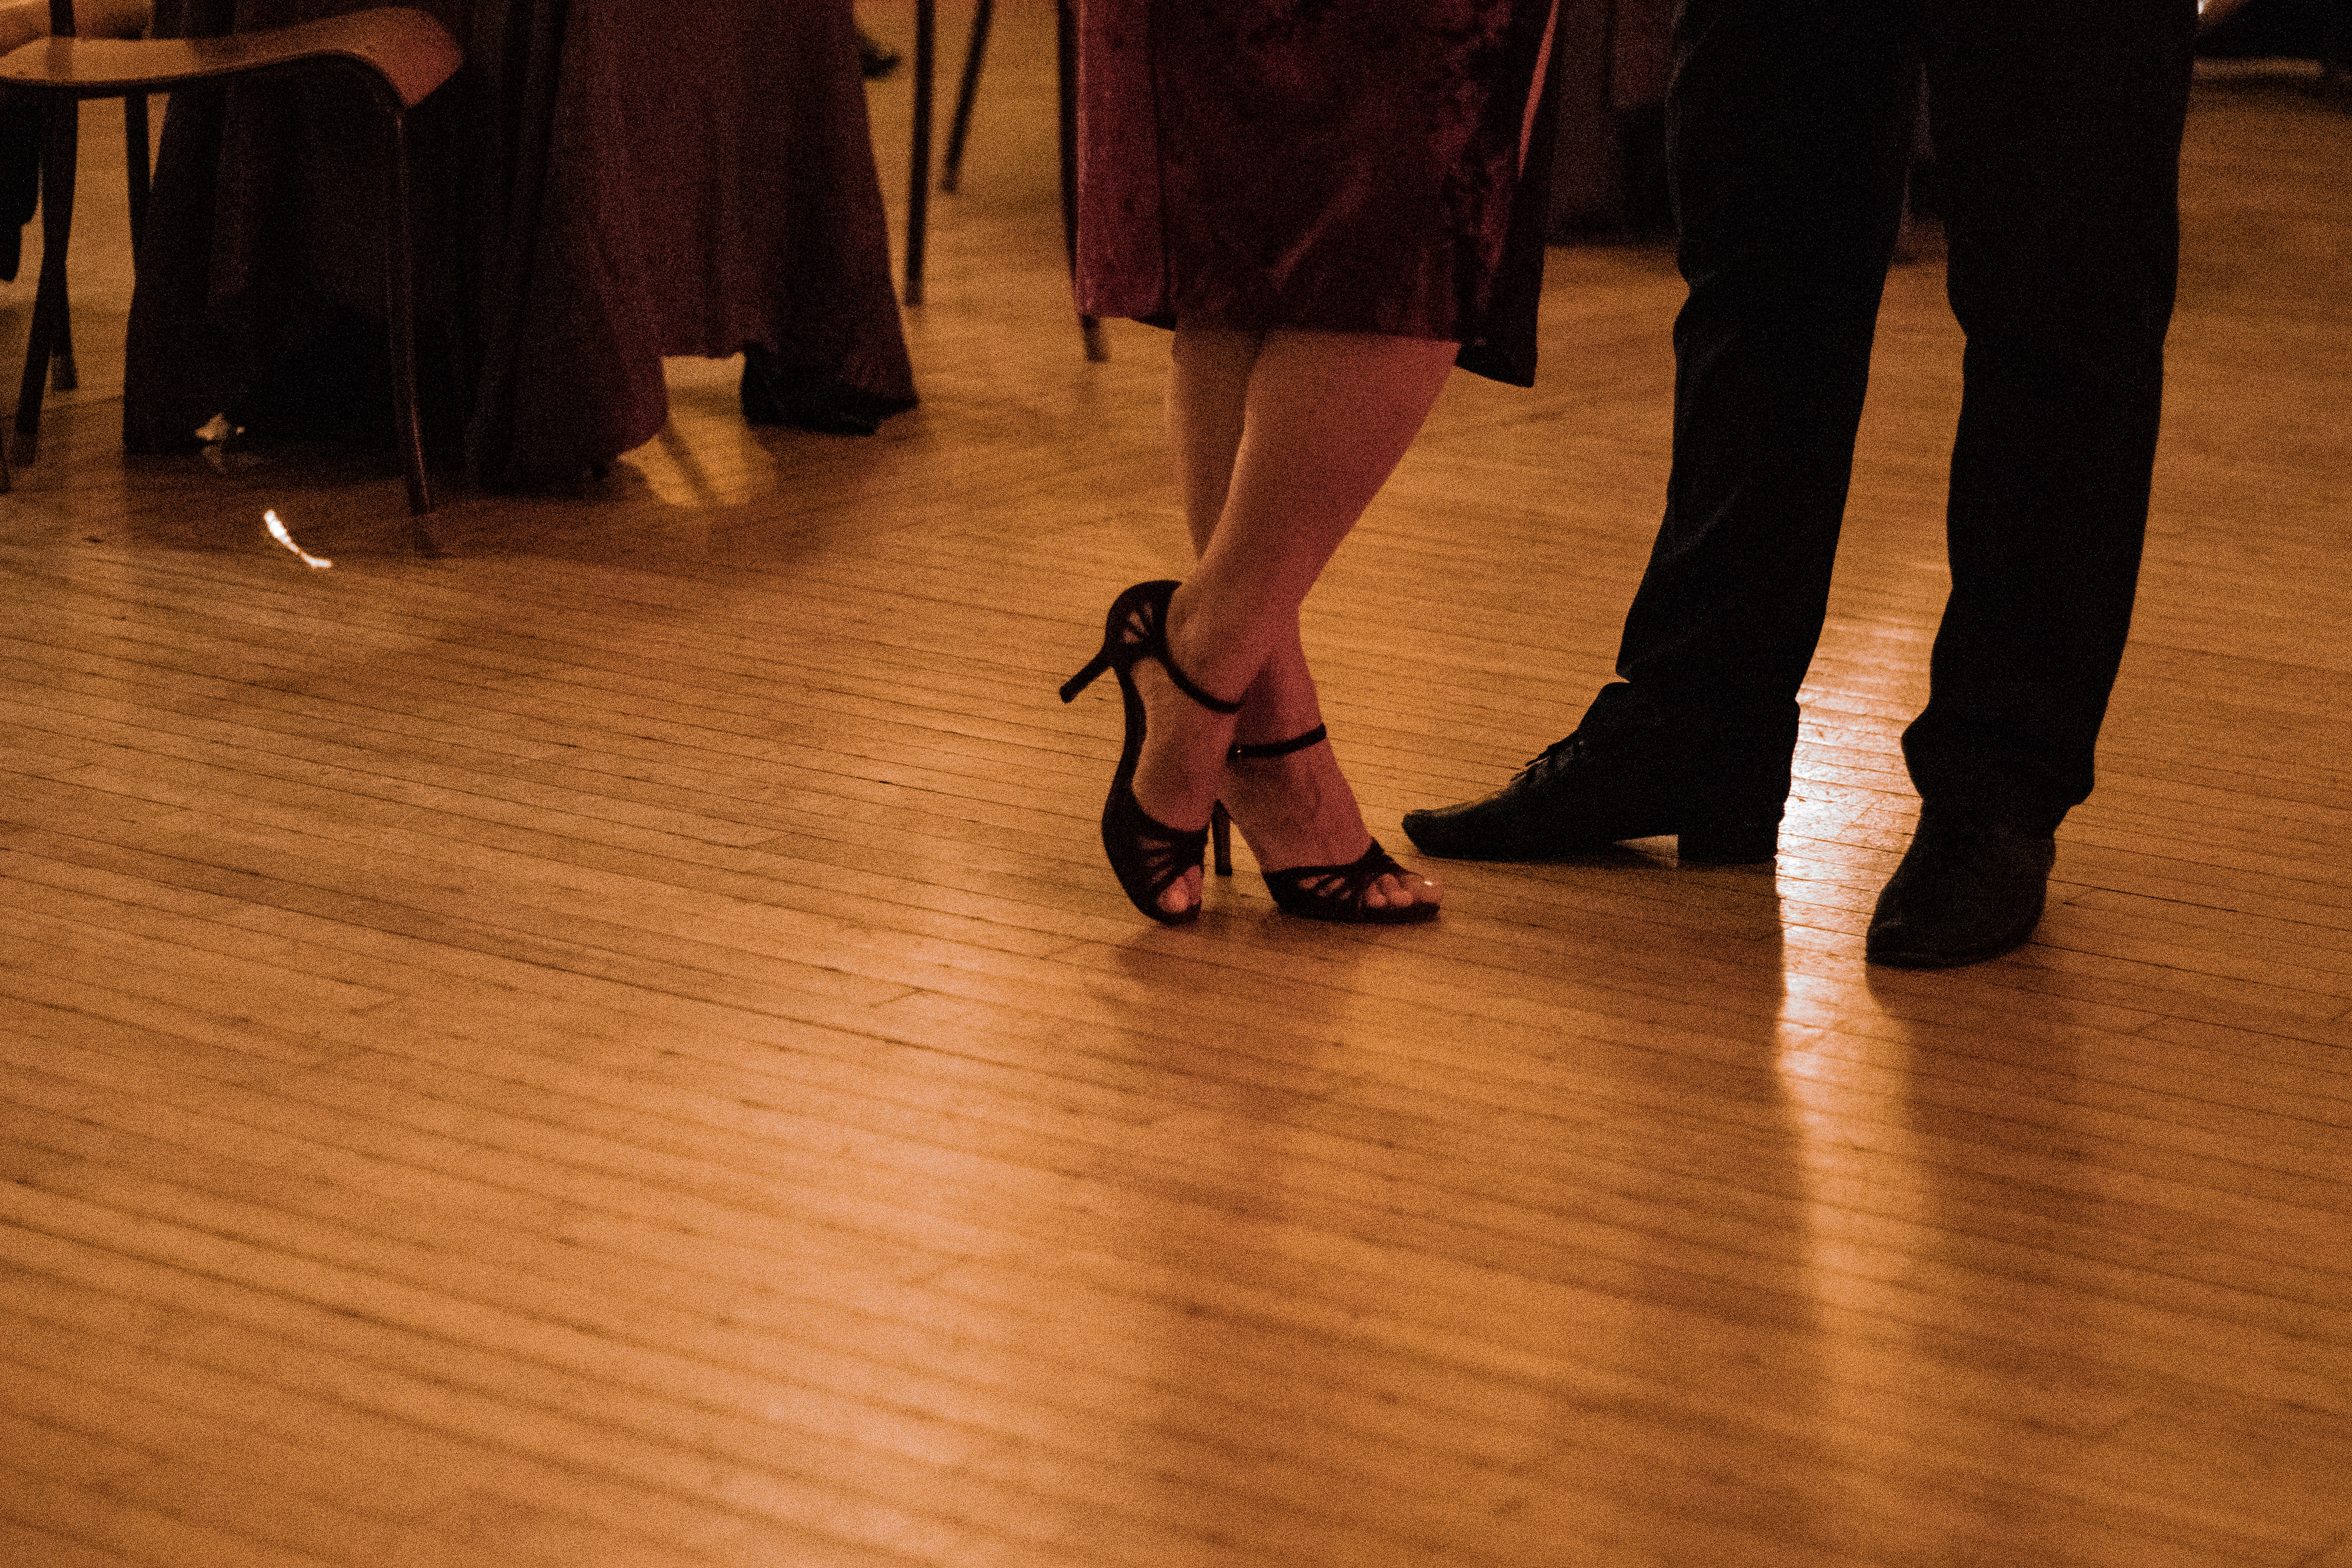 A woman and man’s feet rest upon hardwood floors that shine with a soft yellow light. The woman’s feet, wearing red high-heels, are crossed over each other, the toe of the crossed left foot rests on the ground. The heel is pointed in the air. 